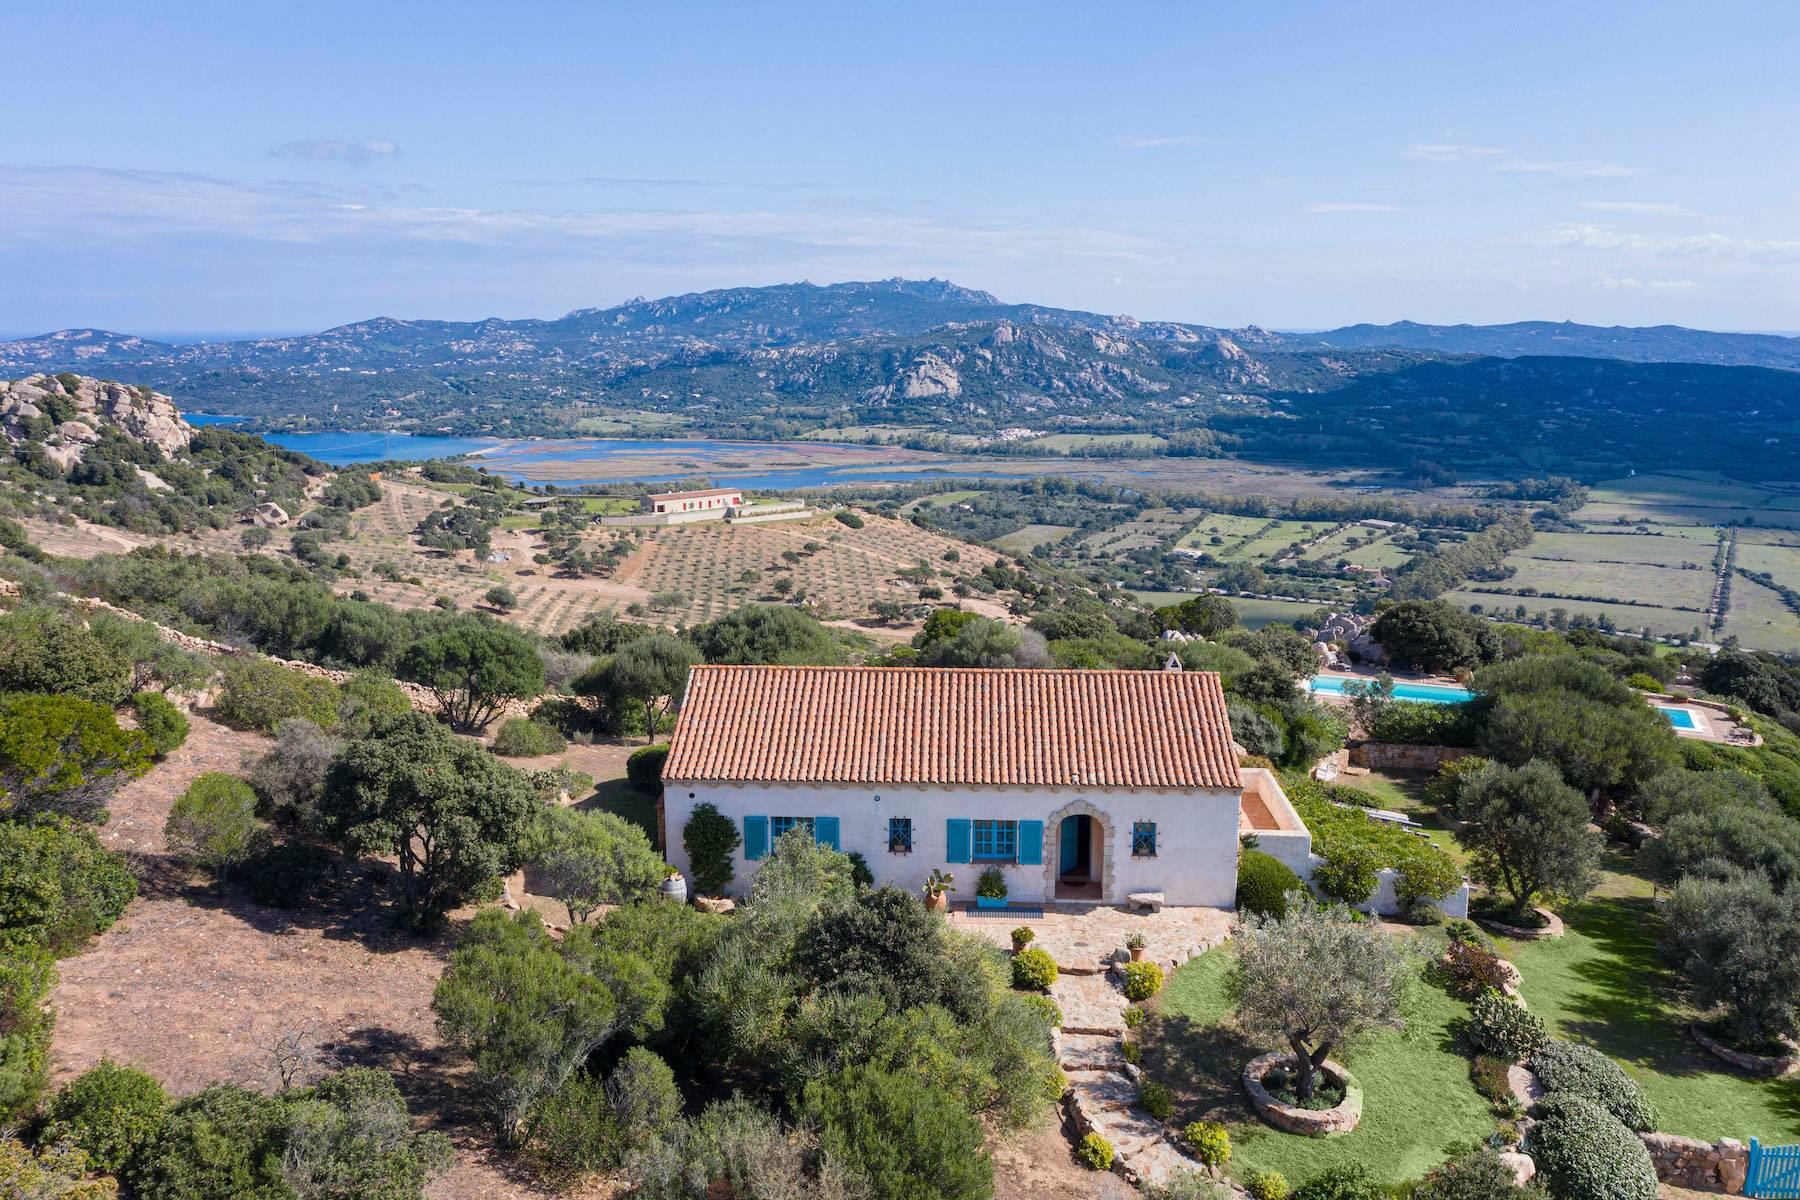 Splendid estate, surrounded by Mediterranean vegetation, overlooking the Gulf of Cannigione - 1